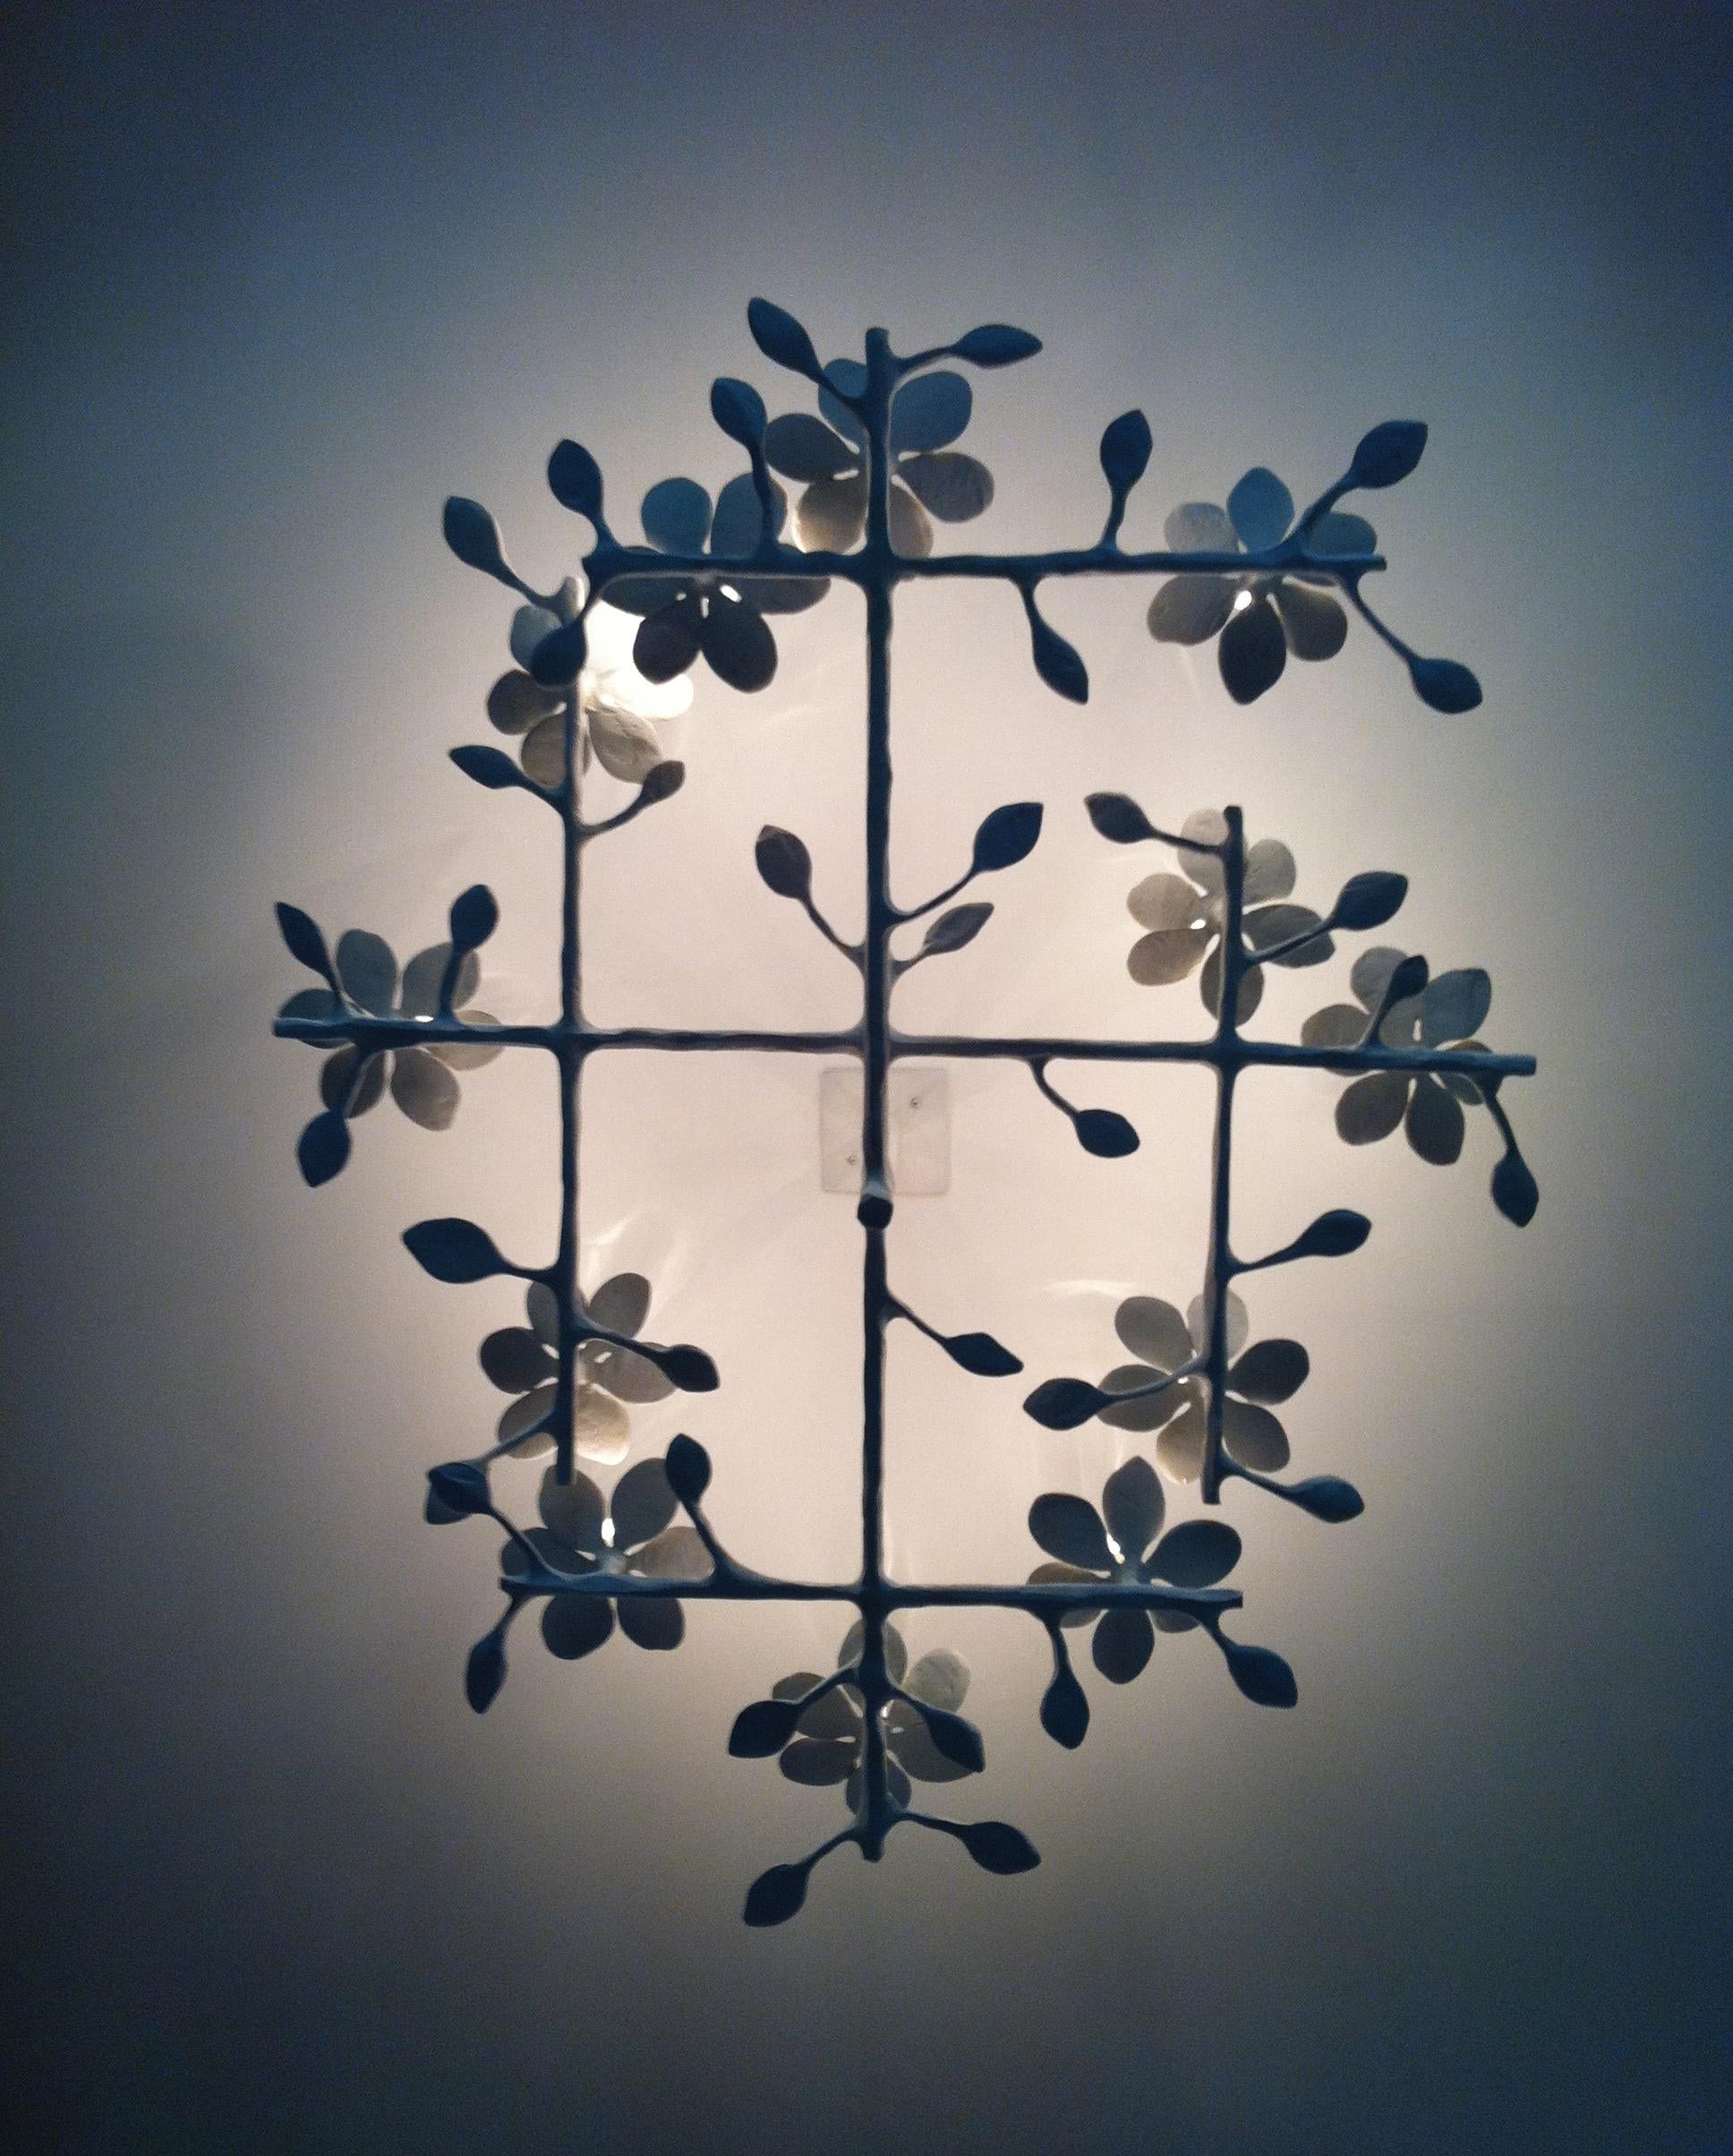 Single layer garden chandelier by Tracey Garet of Apsara Interior Design. The piece has 7 blooms each with a candelabra light and is shown in white plaster. The blooms are surround by branches and leaves. . The fabrication is plaster over steel